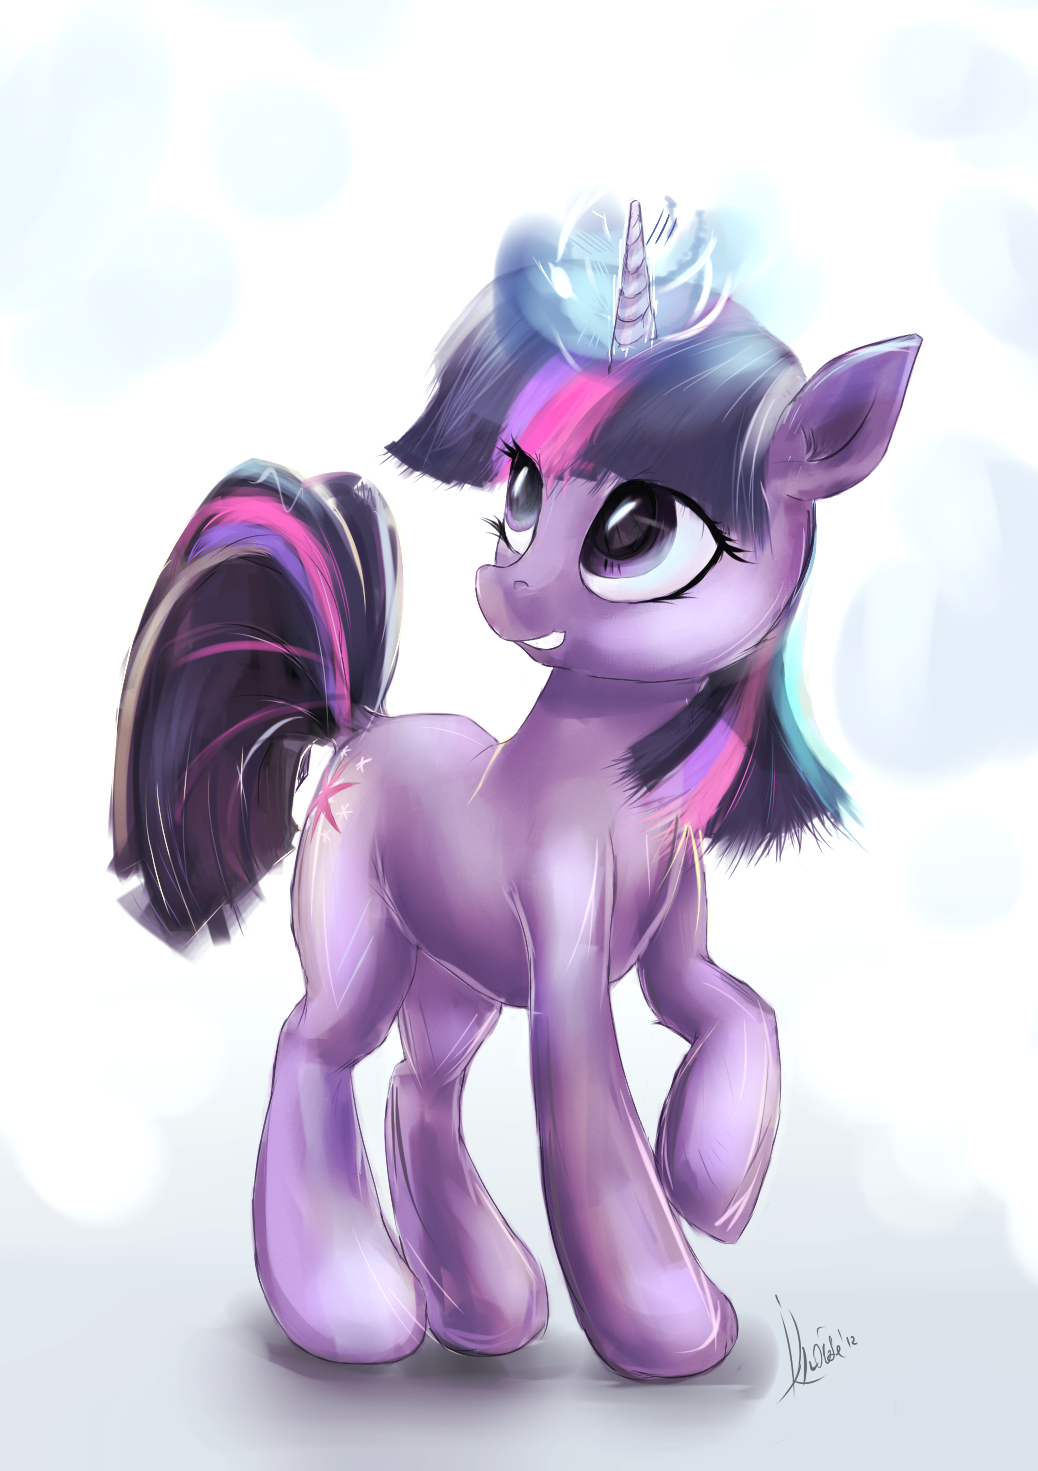 sparkle_by_reefzv-d51sawd.png